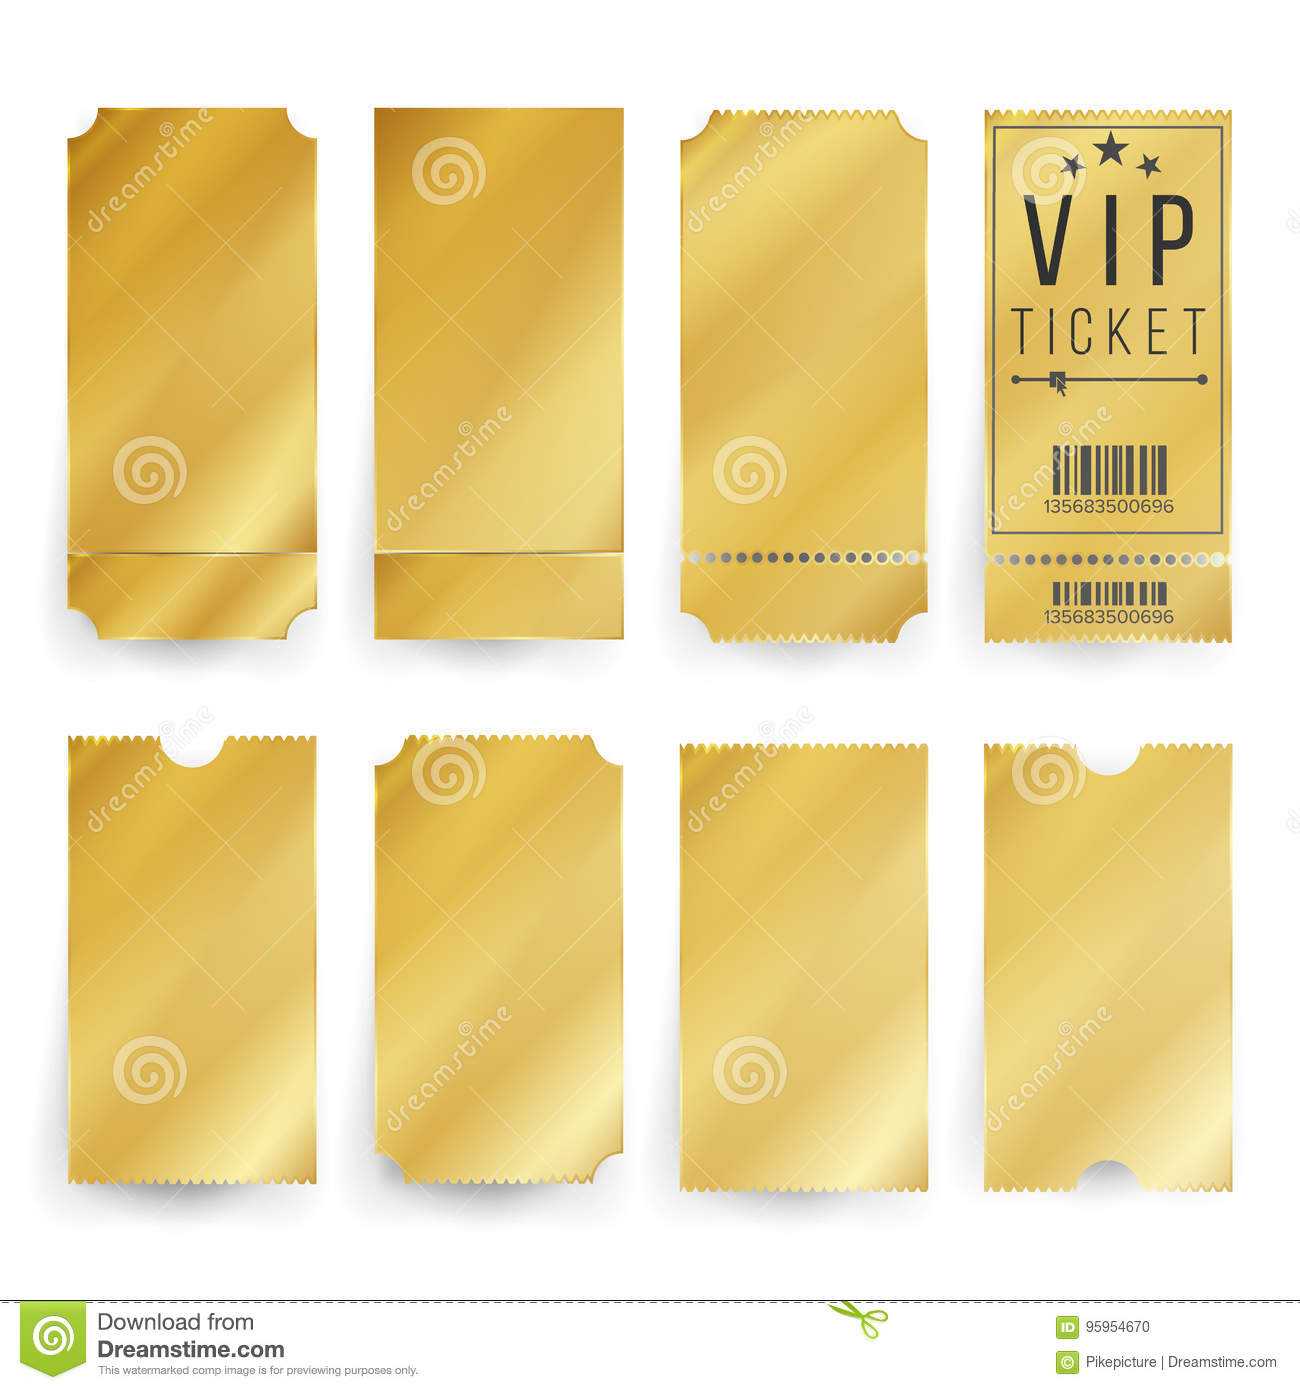 Vip Ticket Template Vector. Empty Golden Tickets And Coupons In Blank Train Ticket Template